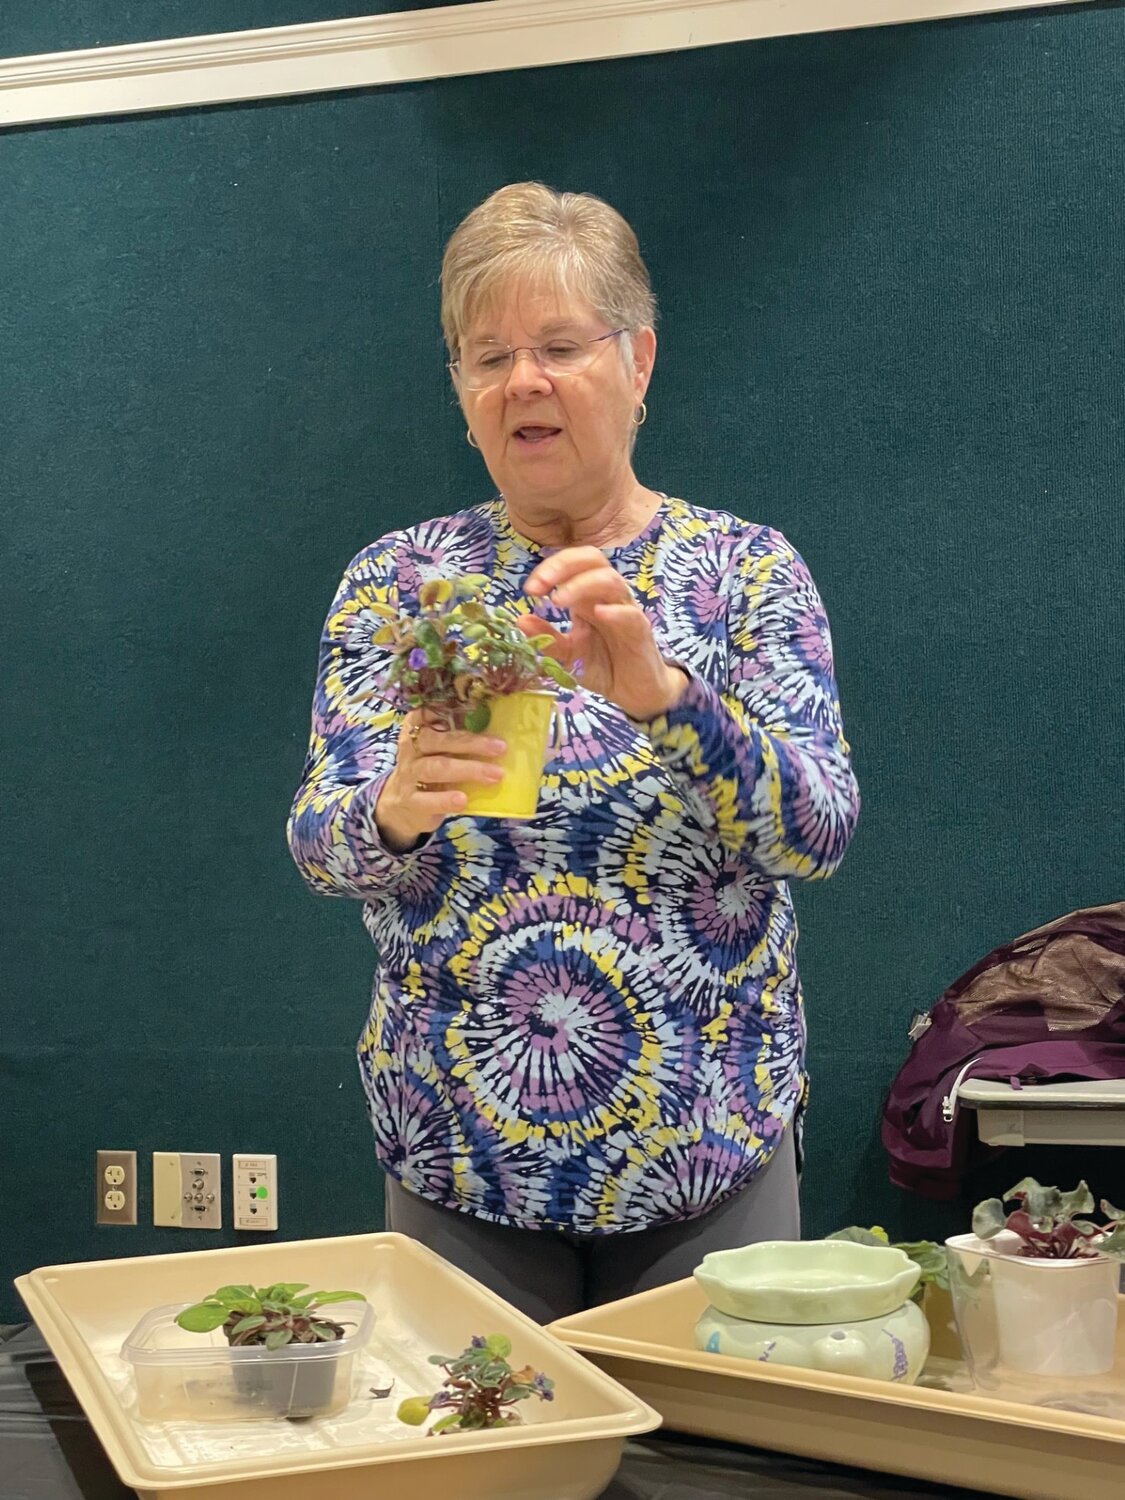 Heart of Jacksonville African Violet Society’s Carol Hixenbaugh shared insight on repotting and propagating plants.